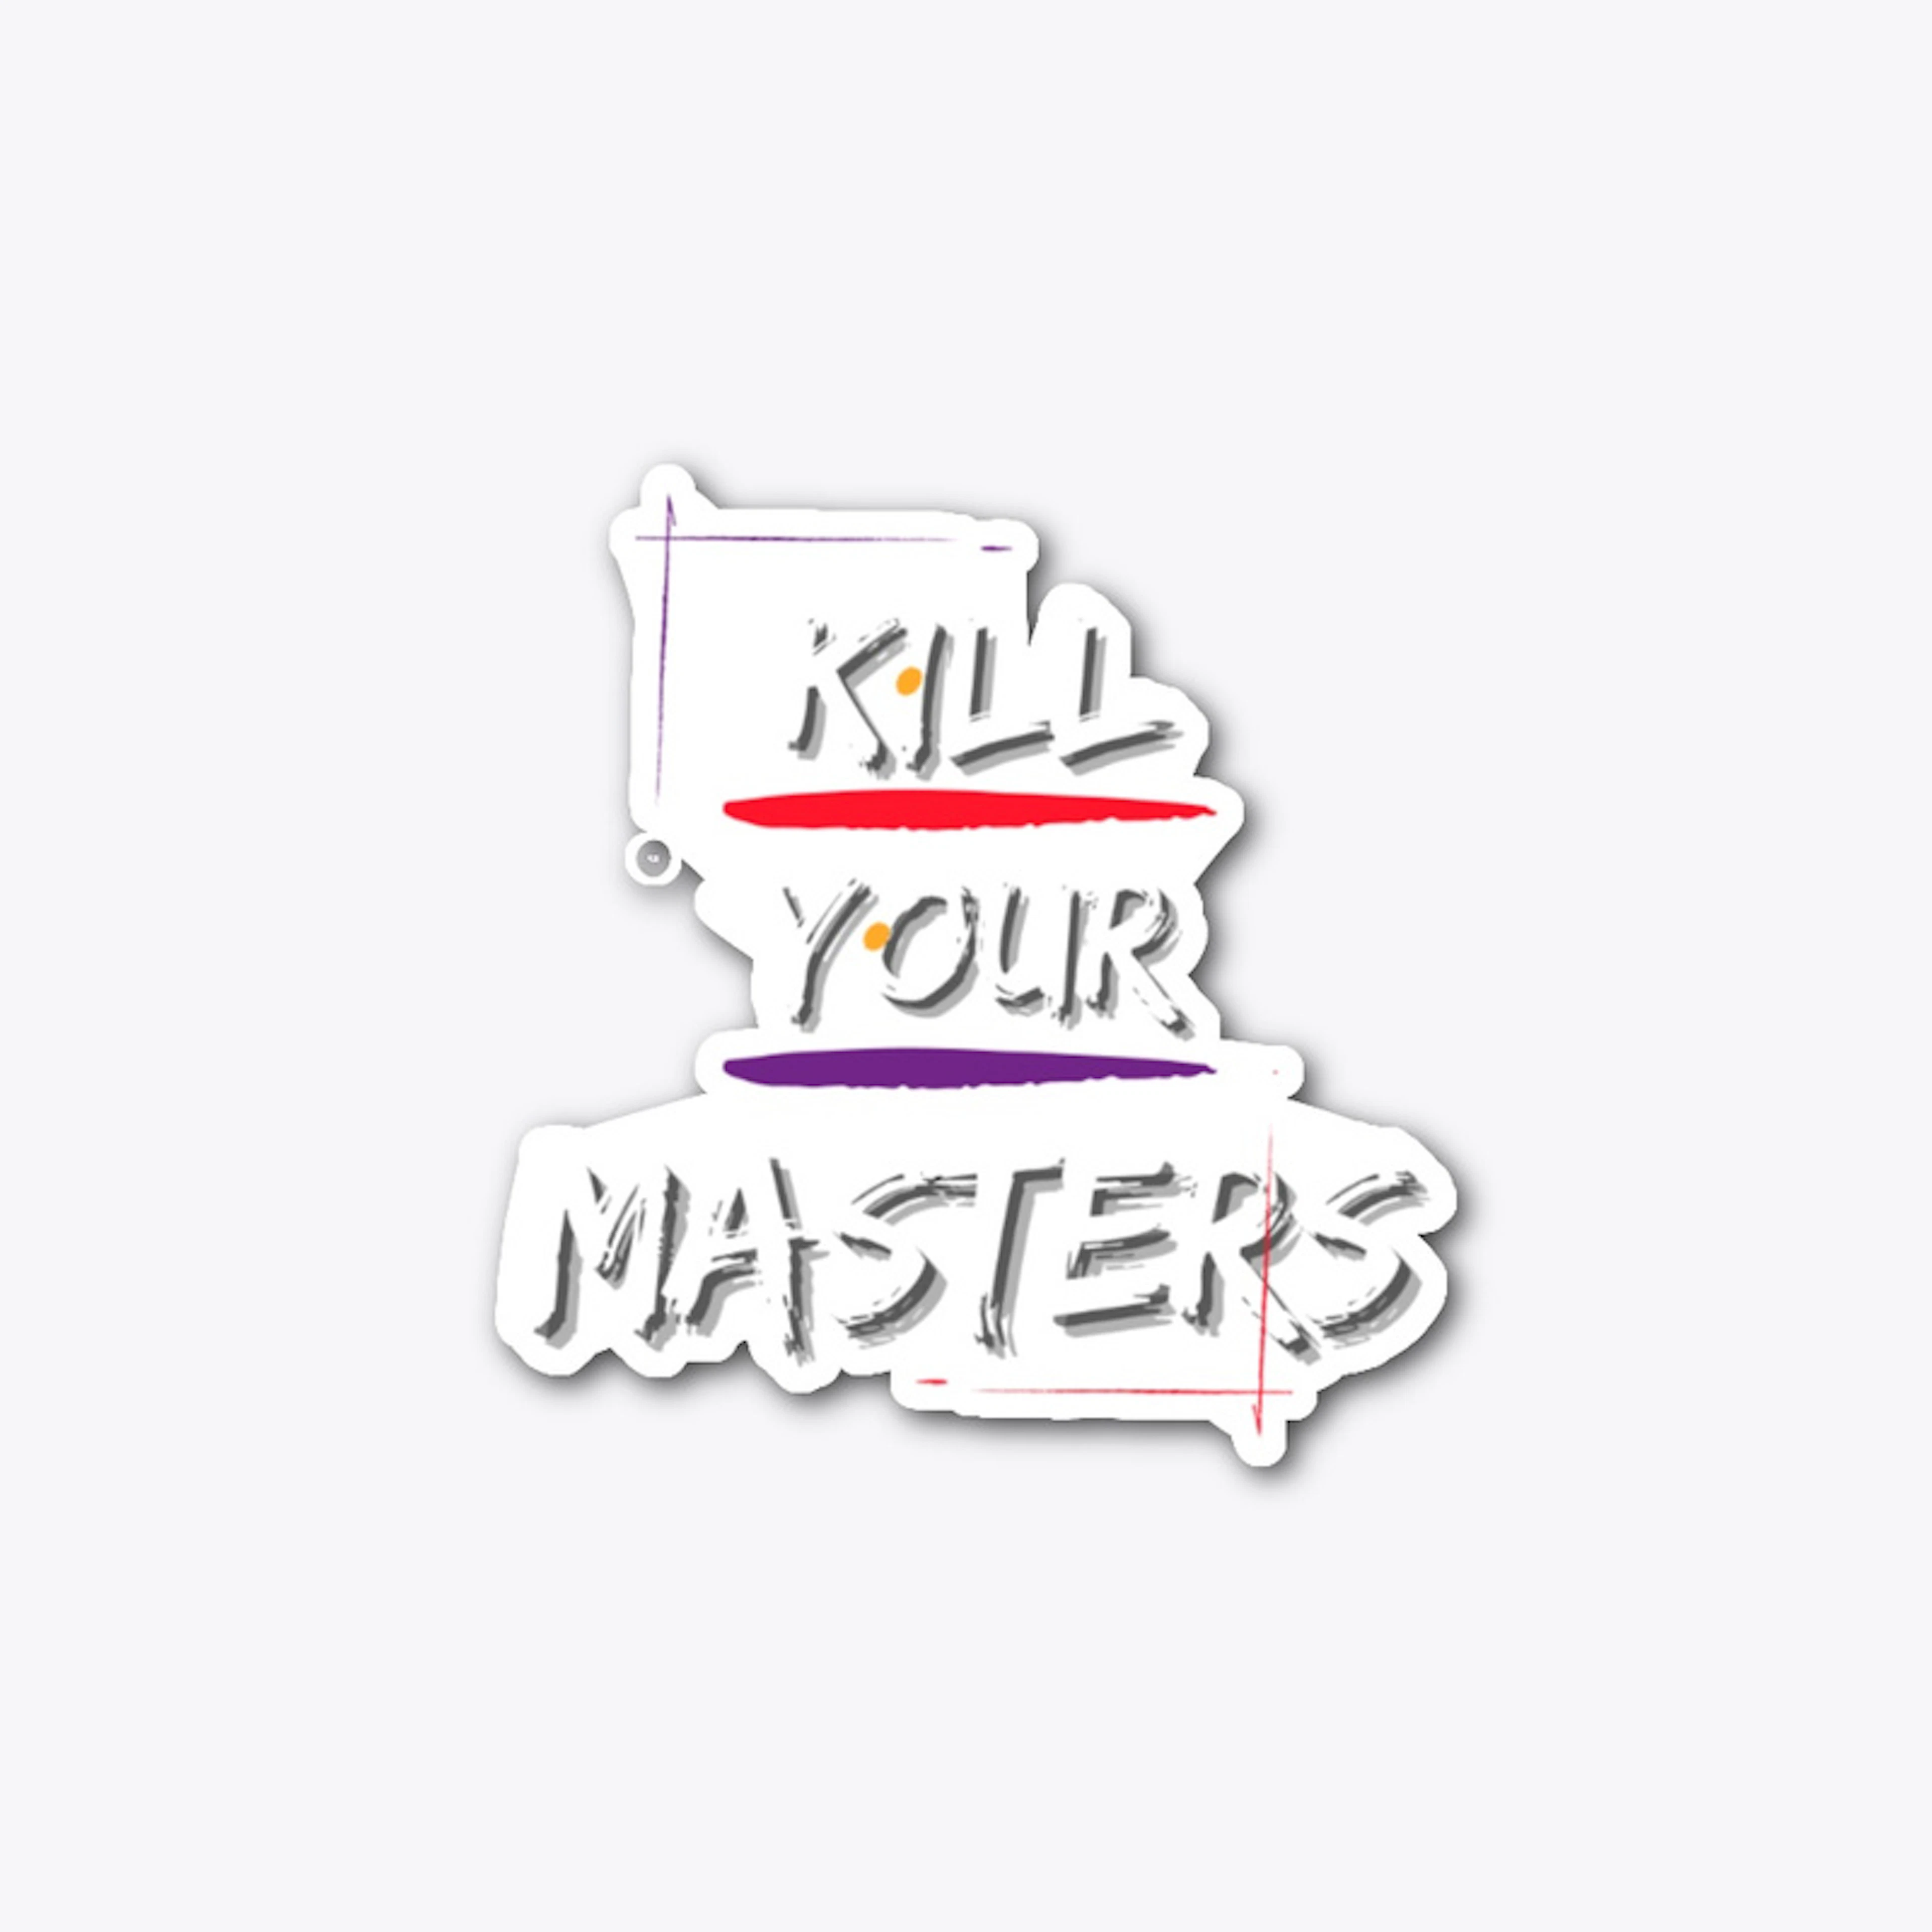 K!ll Your Masters